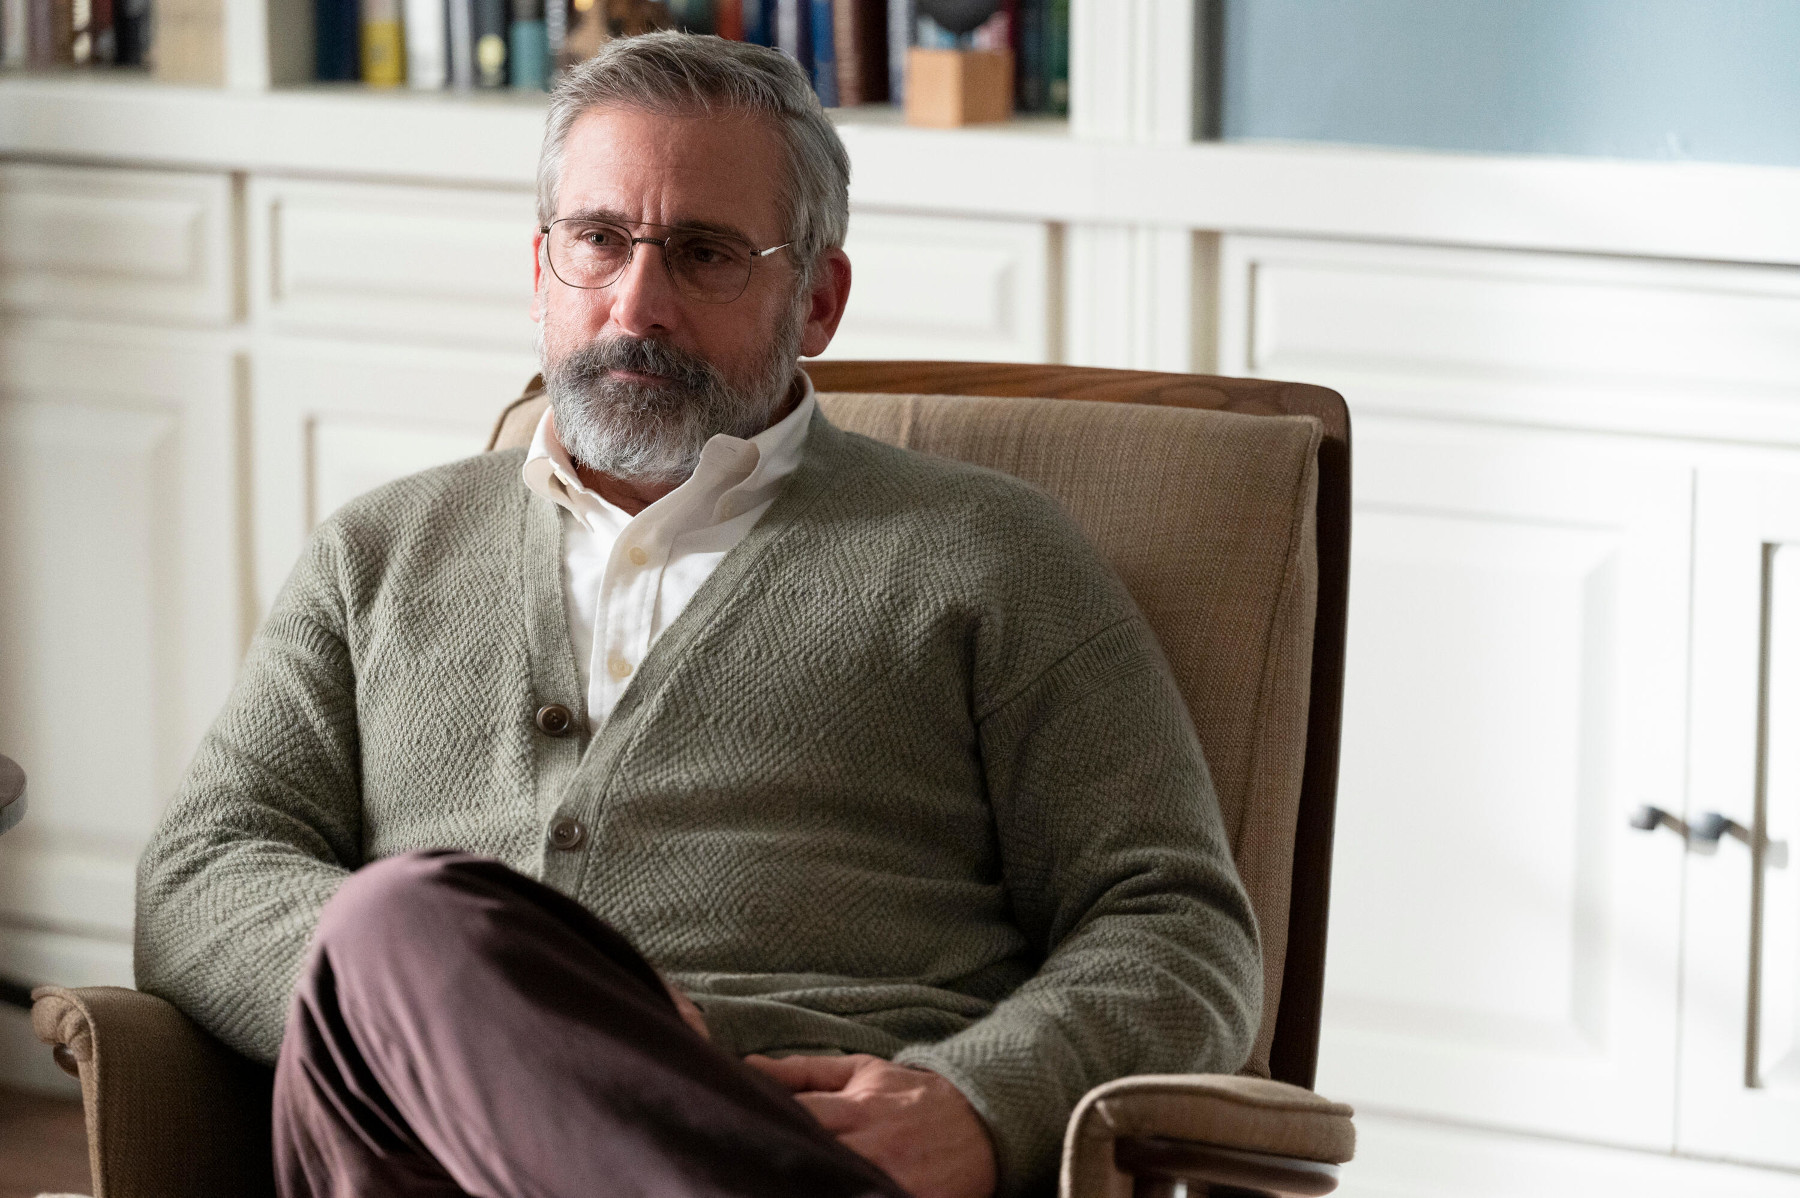 Steve Carell in 'The Patient' for our article about episode 9's release date. He's wearing a grey sweater, sitting in a brown chair, and crossing one leg over the other.